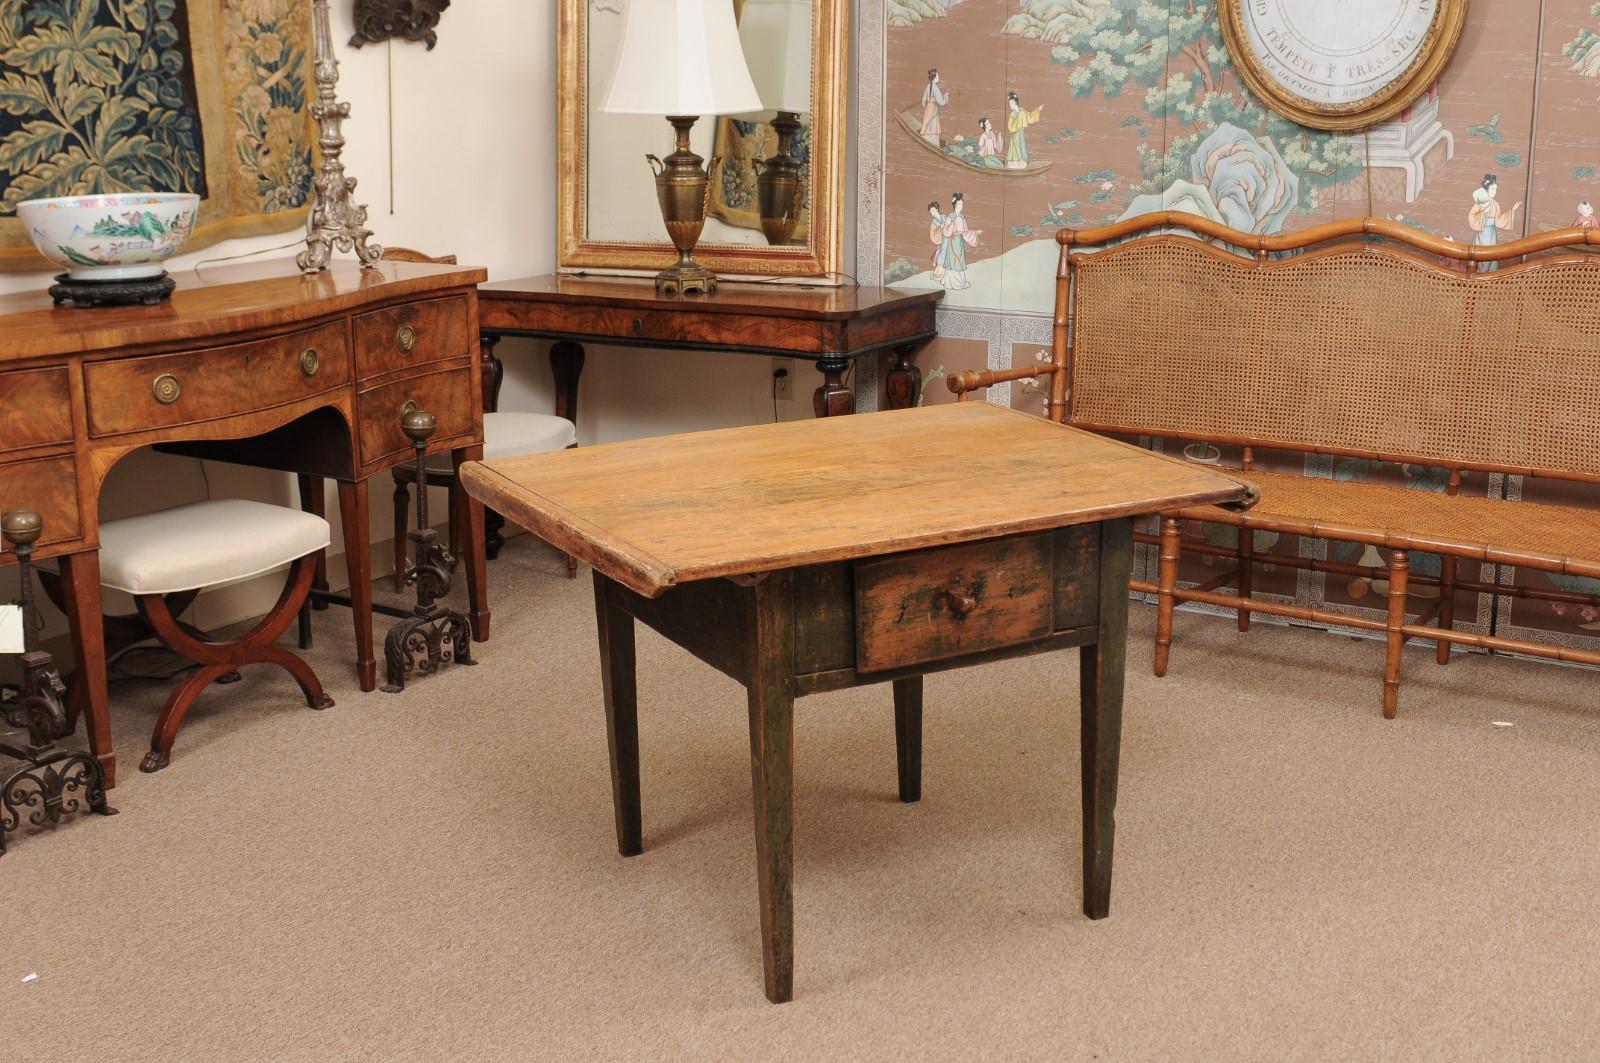 Italian 19th Century Painted Kitchen Table with 1 Deep Drawer & Tapered Legs, Sout For Sale